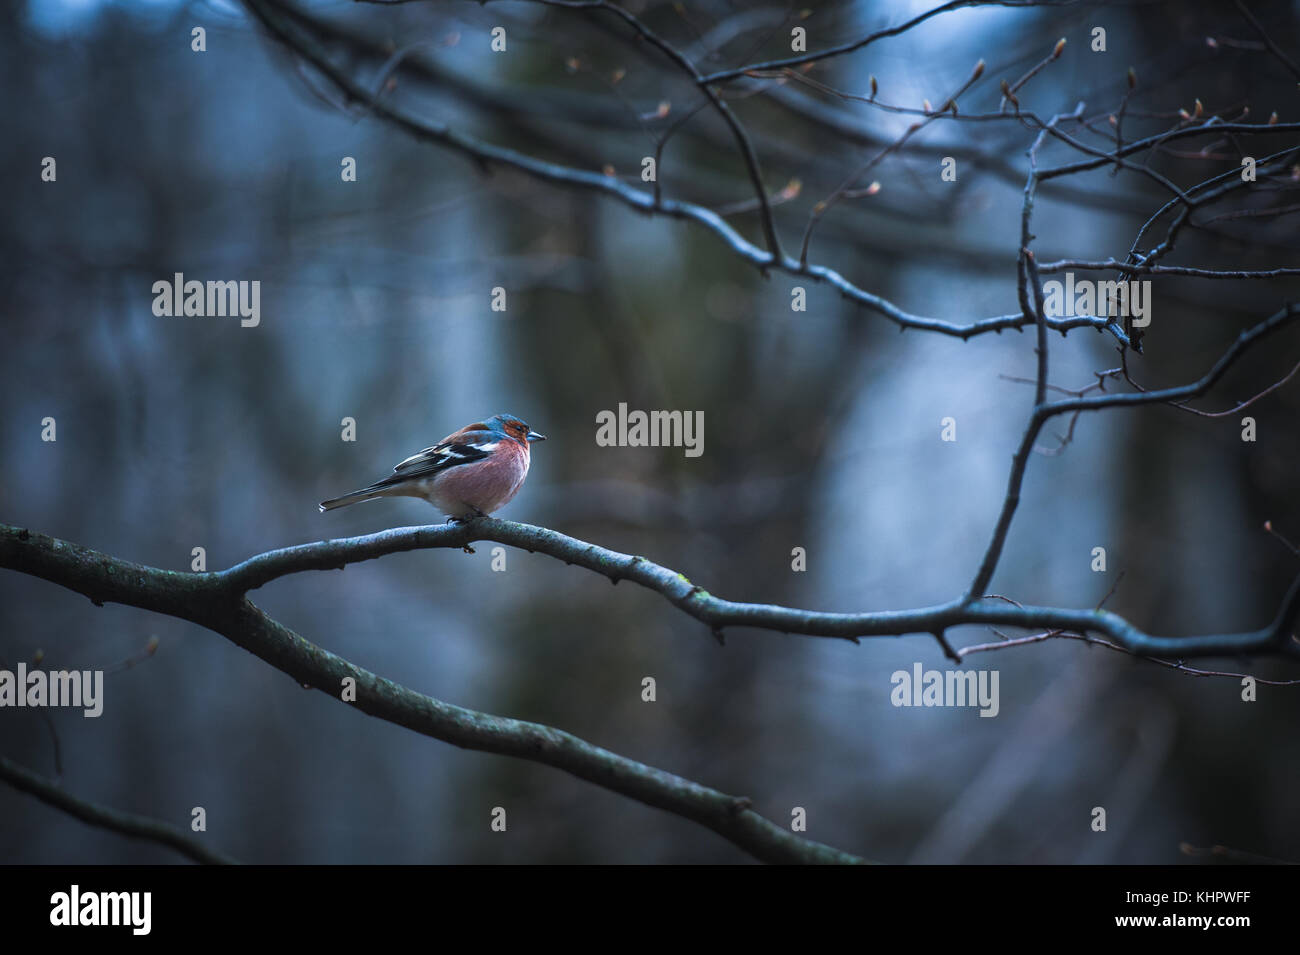 Male House Finch on an icy branch on the tree Stock Photo